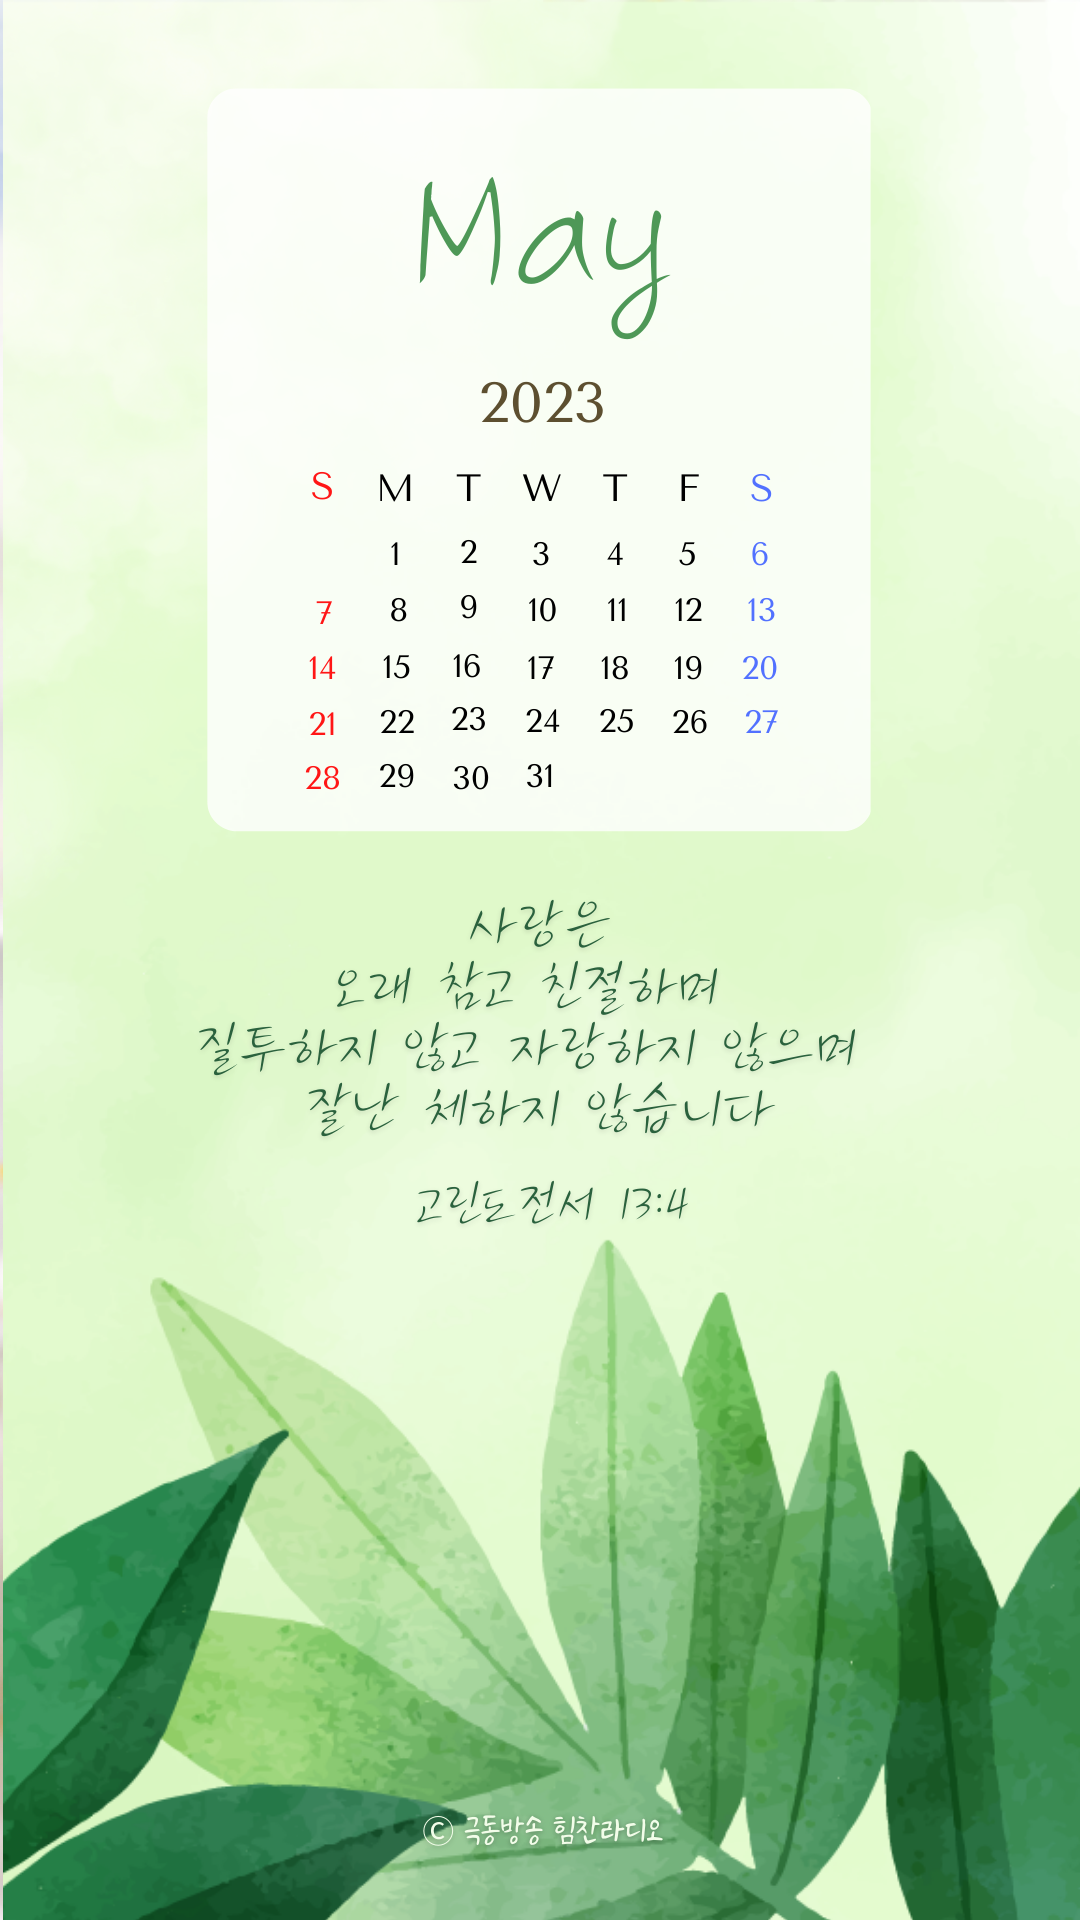 White Green One Photo Flowers April Calendar 2023 Spring Phone Wallpaper.png